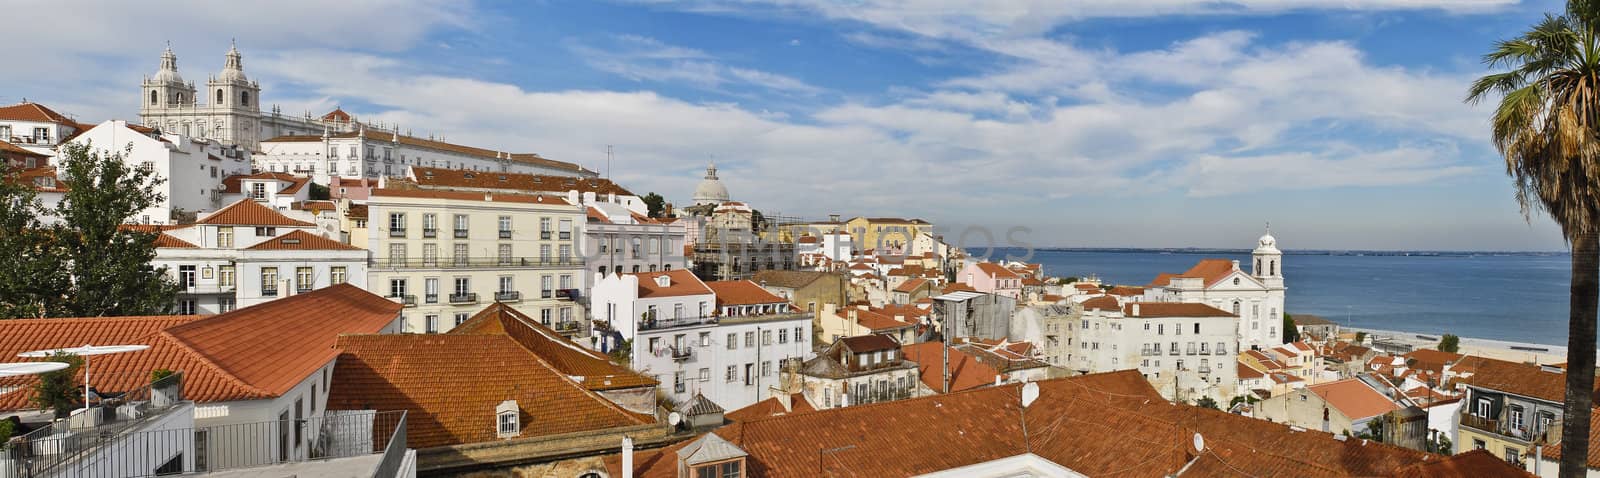 Panorama from Lisbon city in Portugal, Europe.